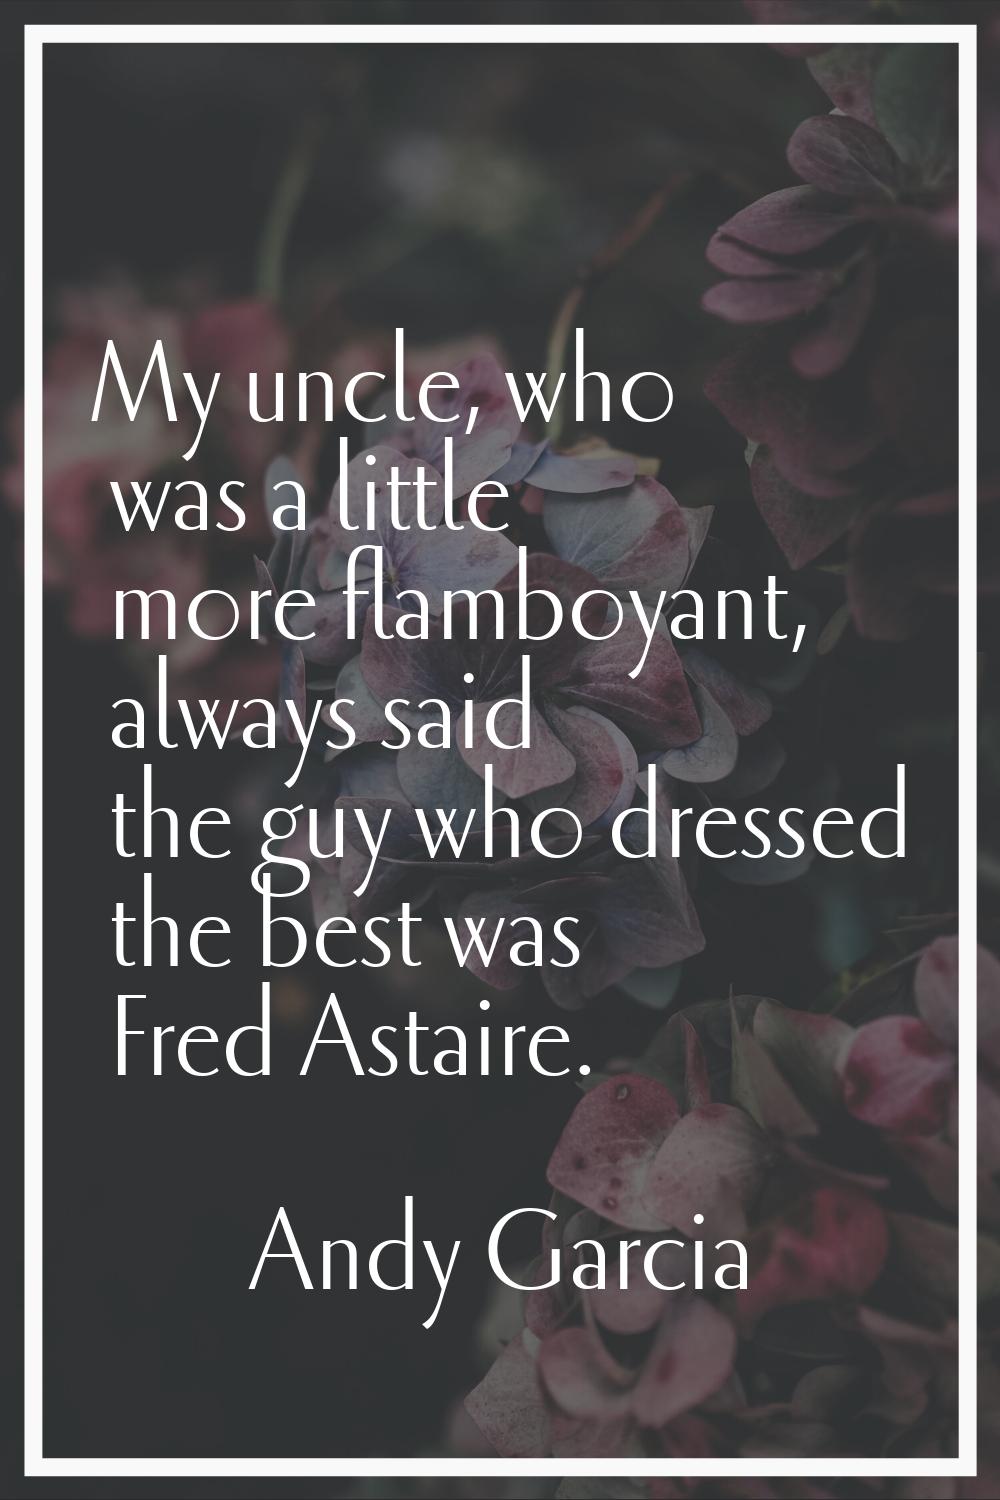 My uncle, who was a little more flamboyant, always said the guy who dressed the best was Fred Astai